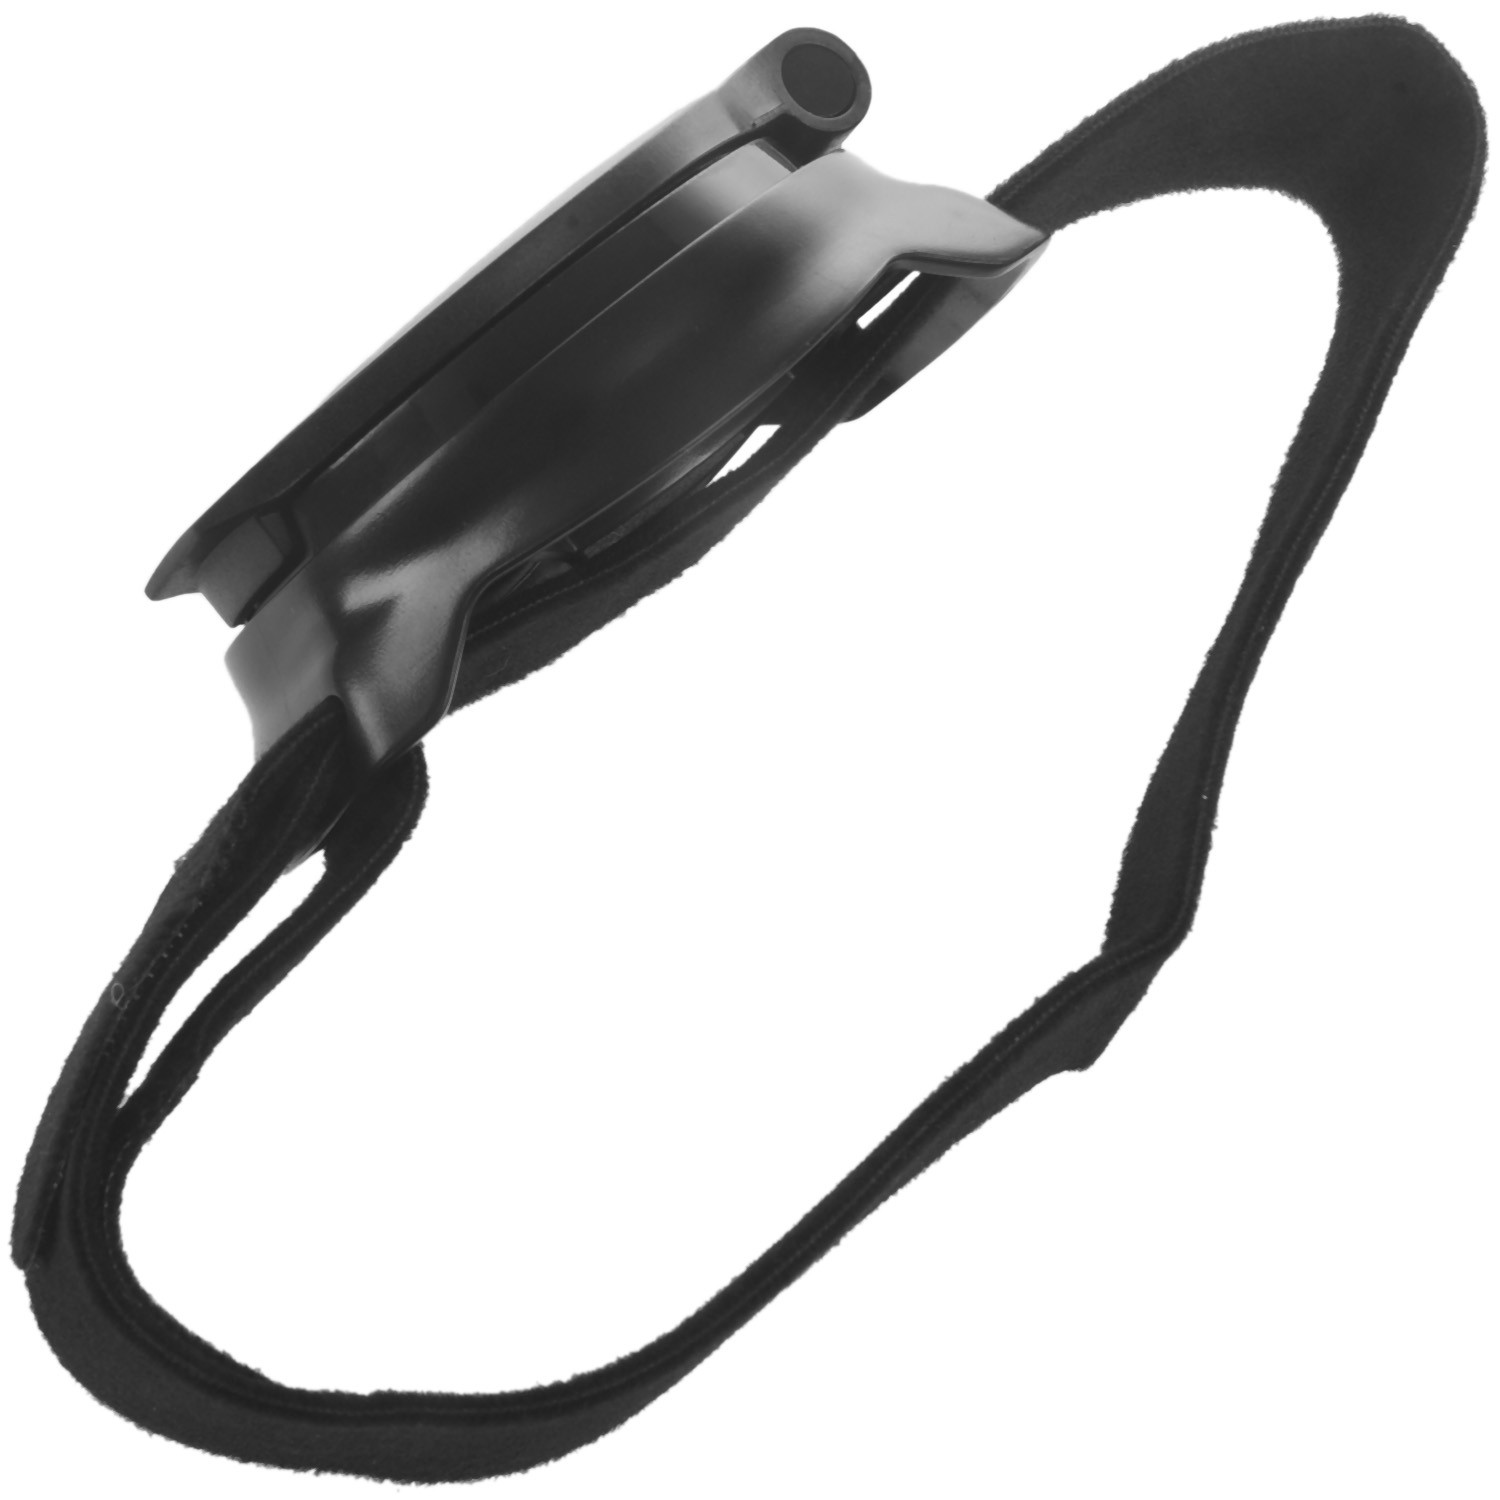 wristband mirror for cyclists